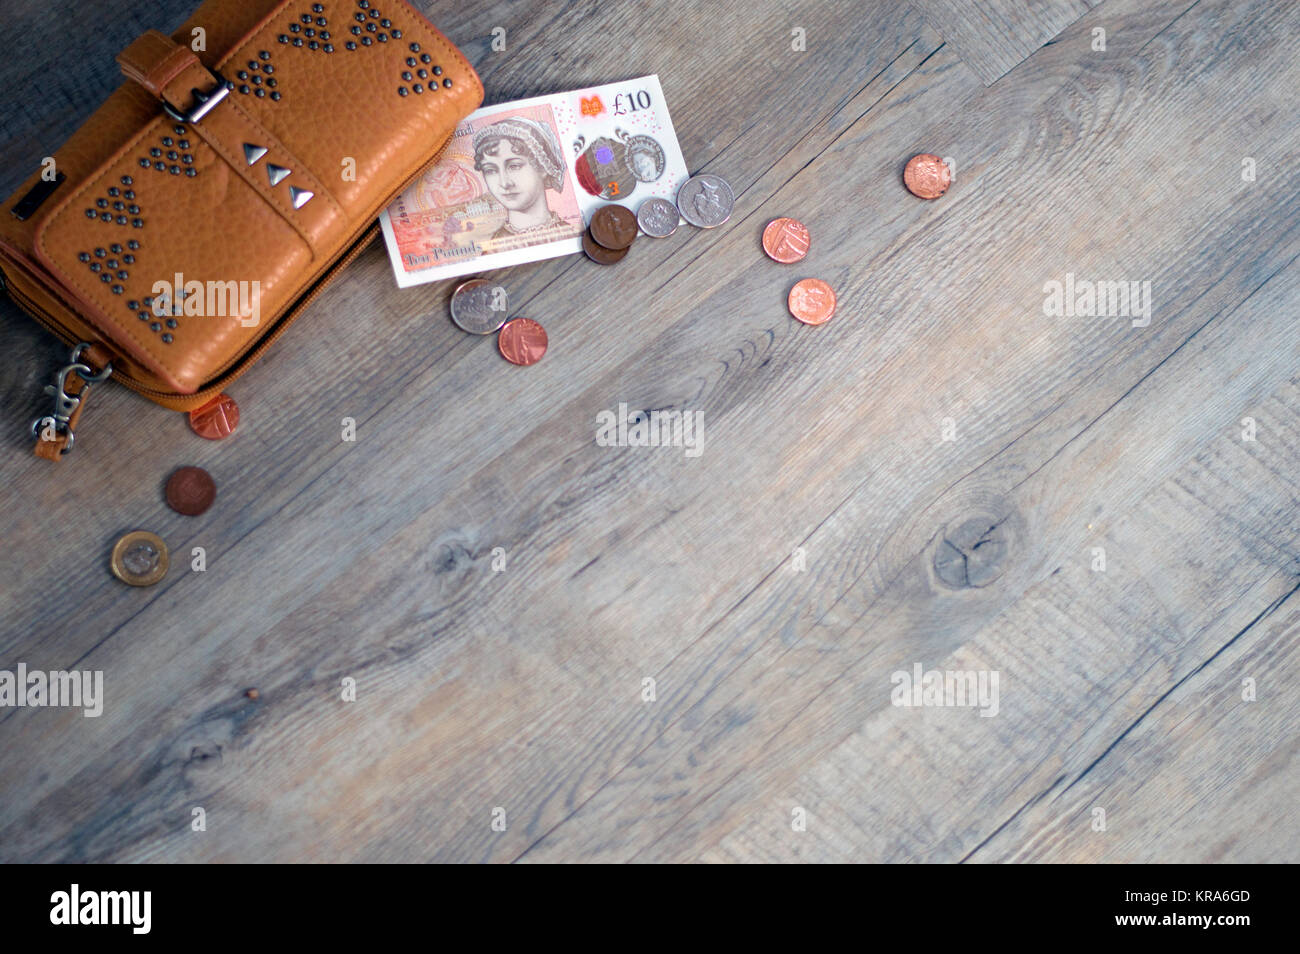 Money (loose change) and wallet on oak plank background. Stock Photo